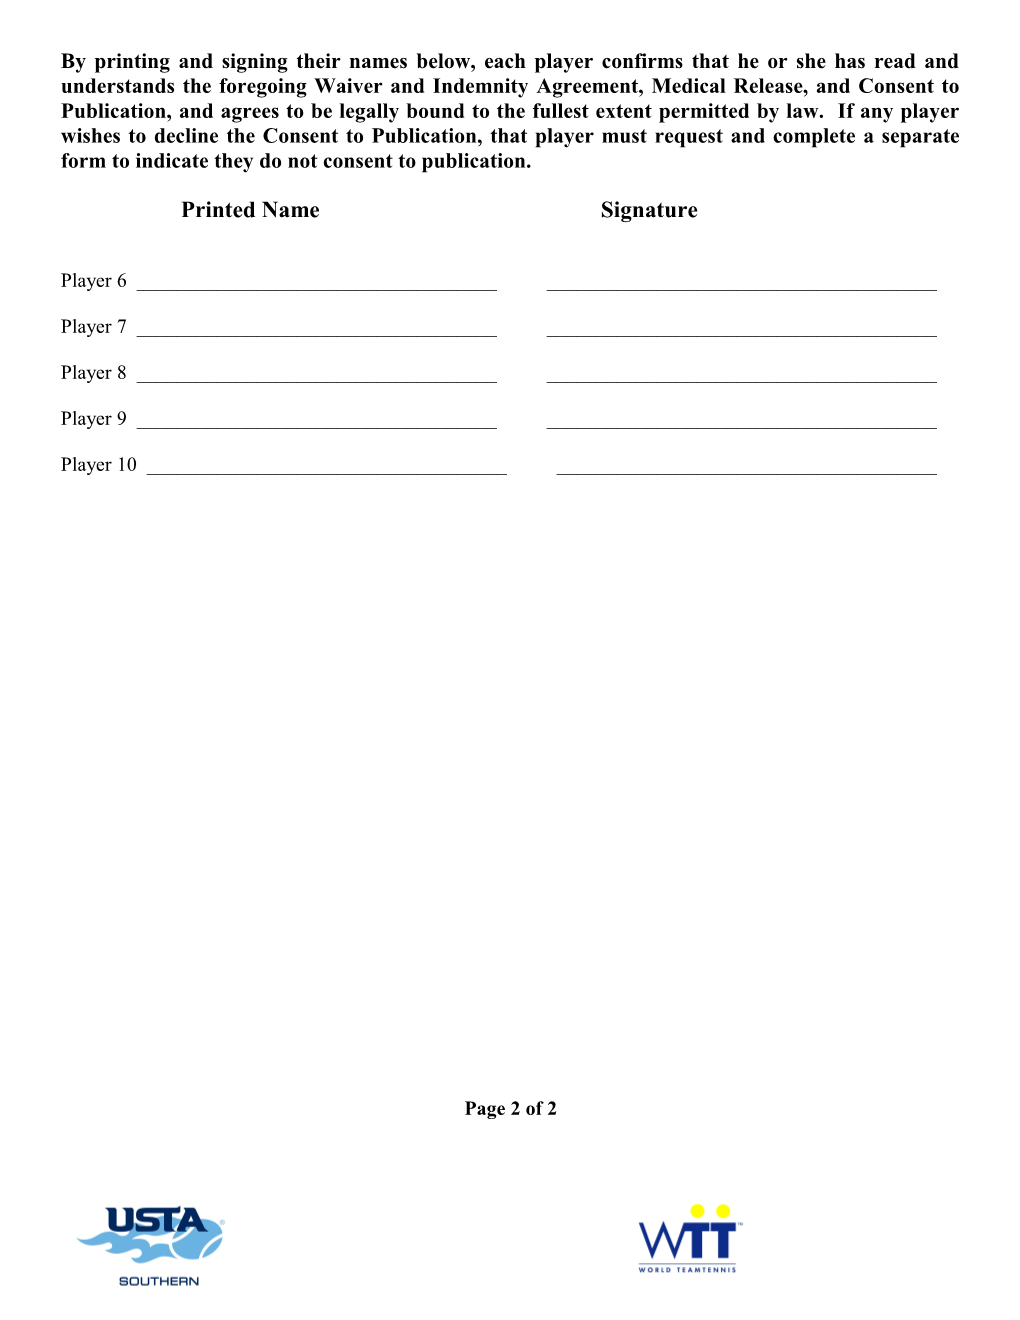 Consent & Waiver Form Bring Signed Copies to Tournament Site